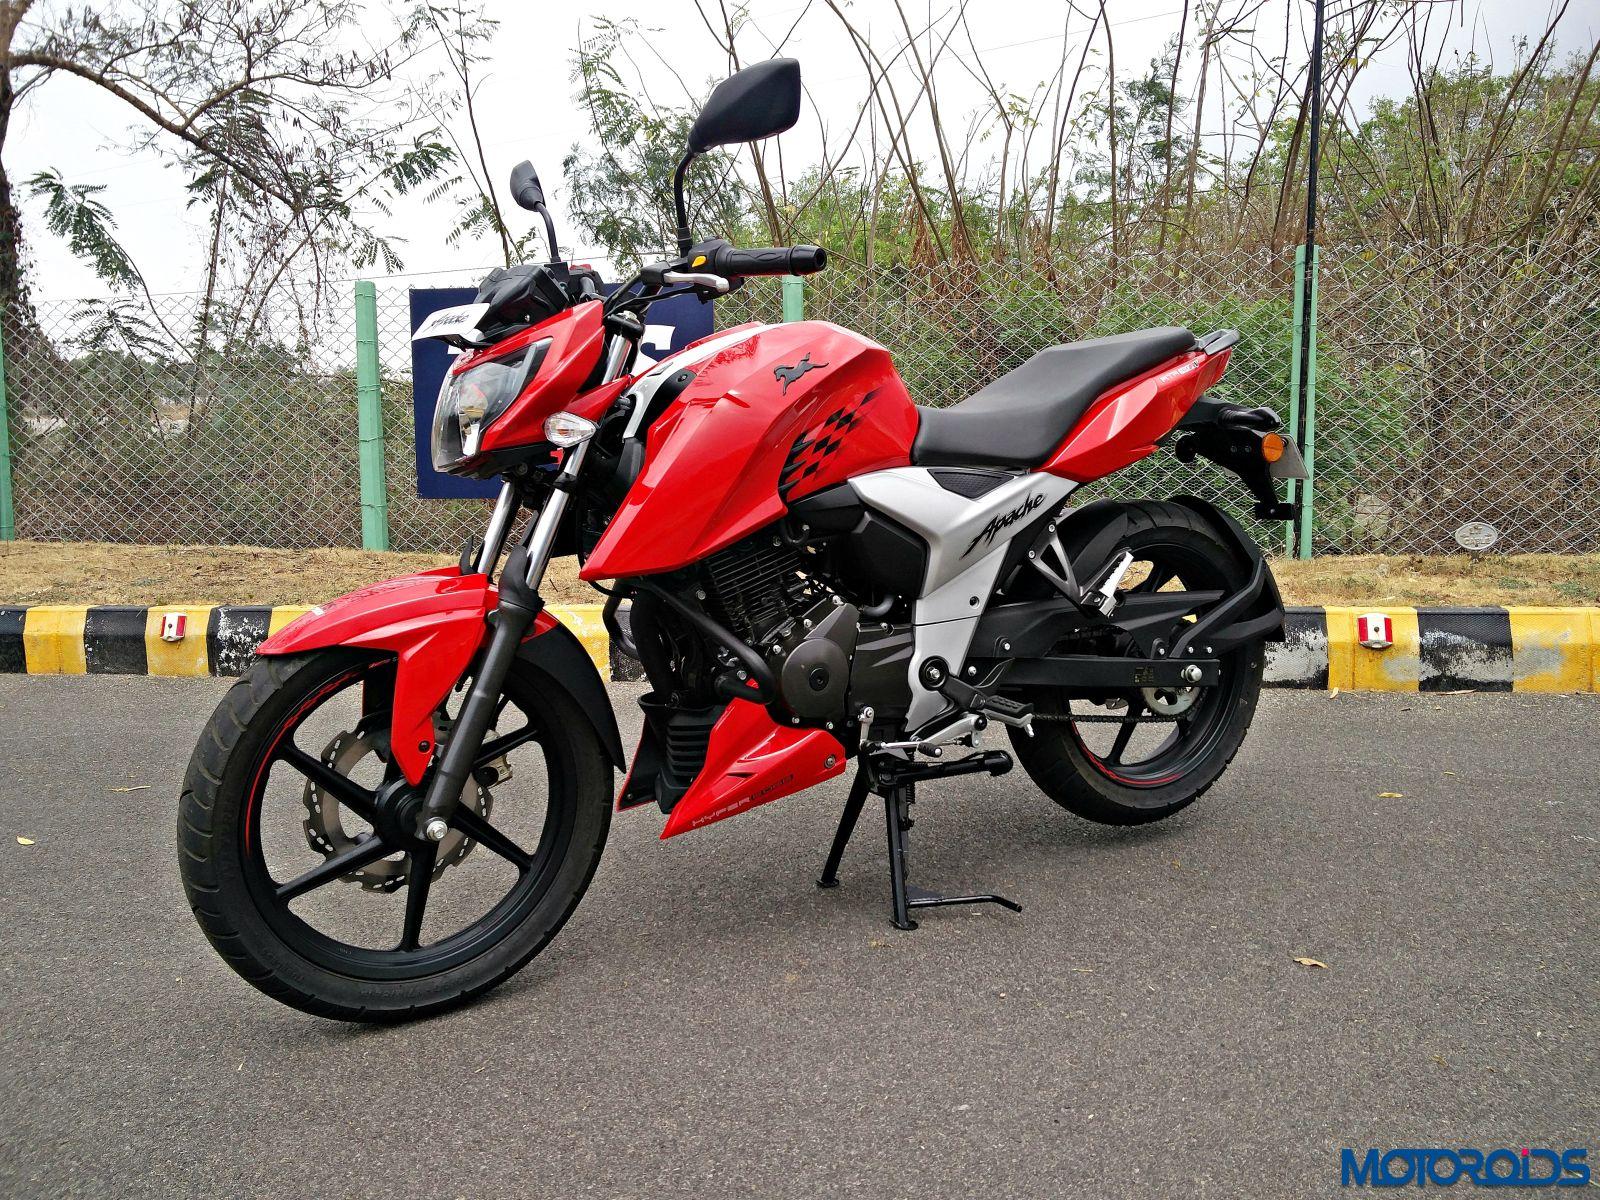 After Conquering India, Where Is the TVS Apache RTR 160 4V Headed